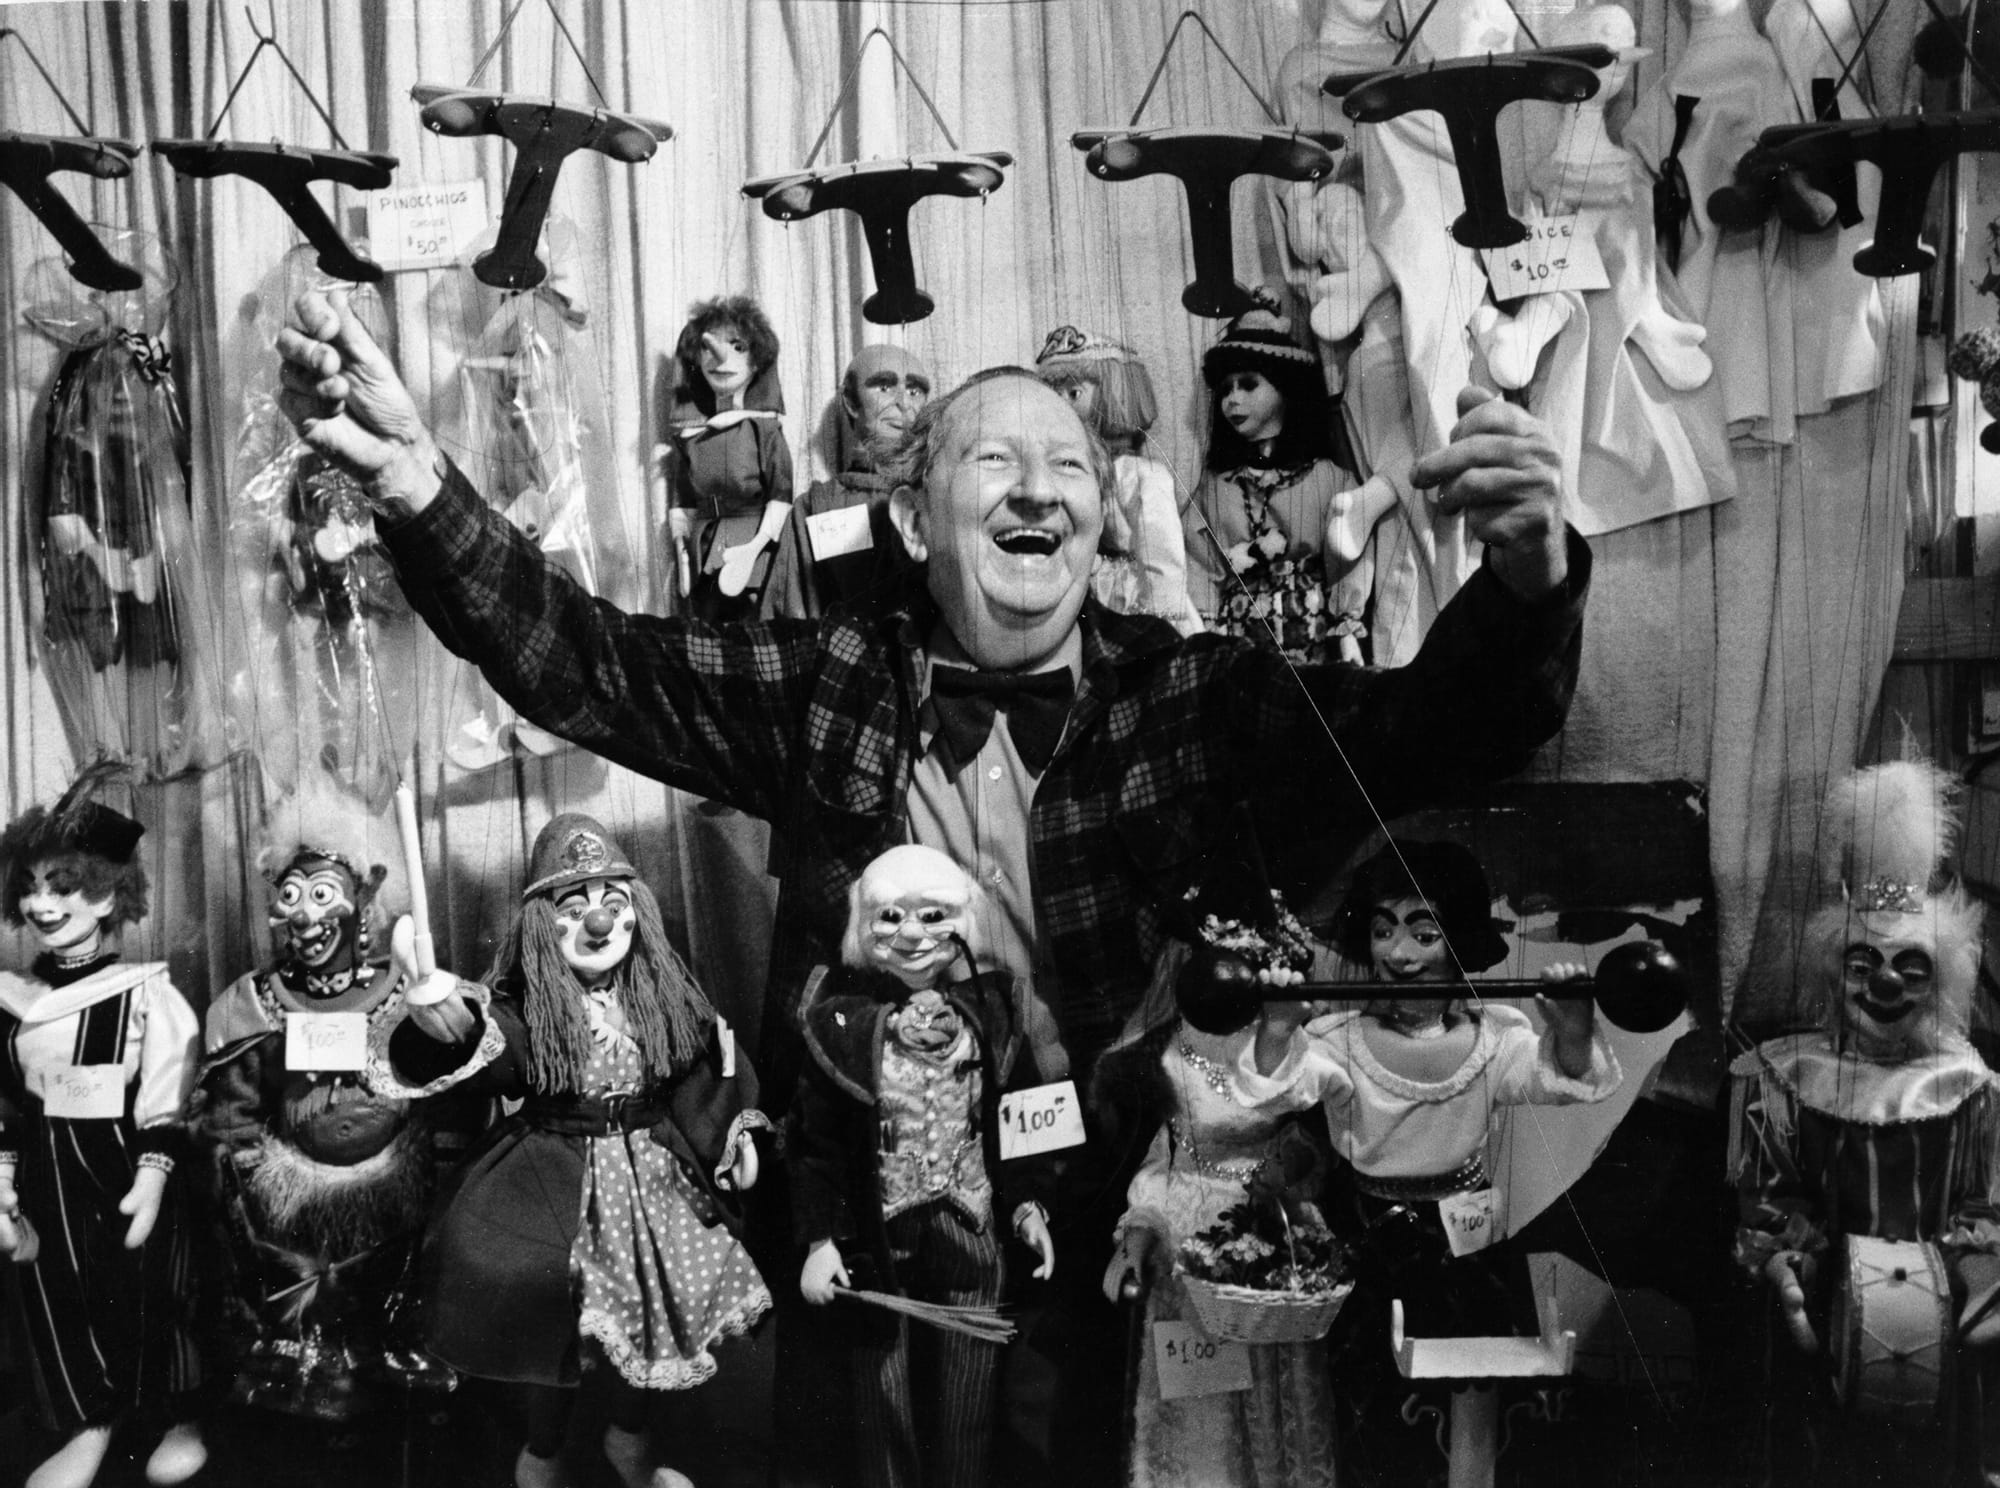 A Smiling Harry Burnett poses with arms extended surrounded by Puppets